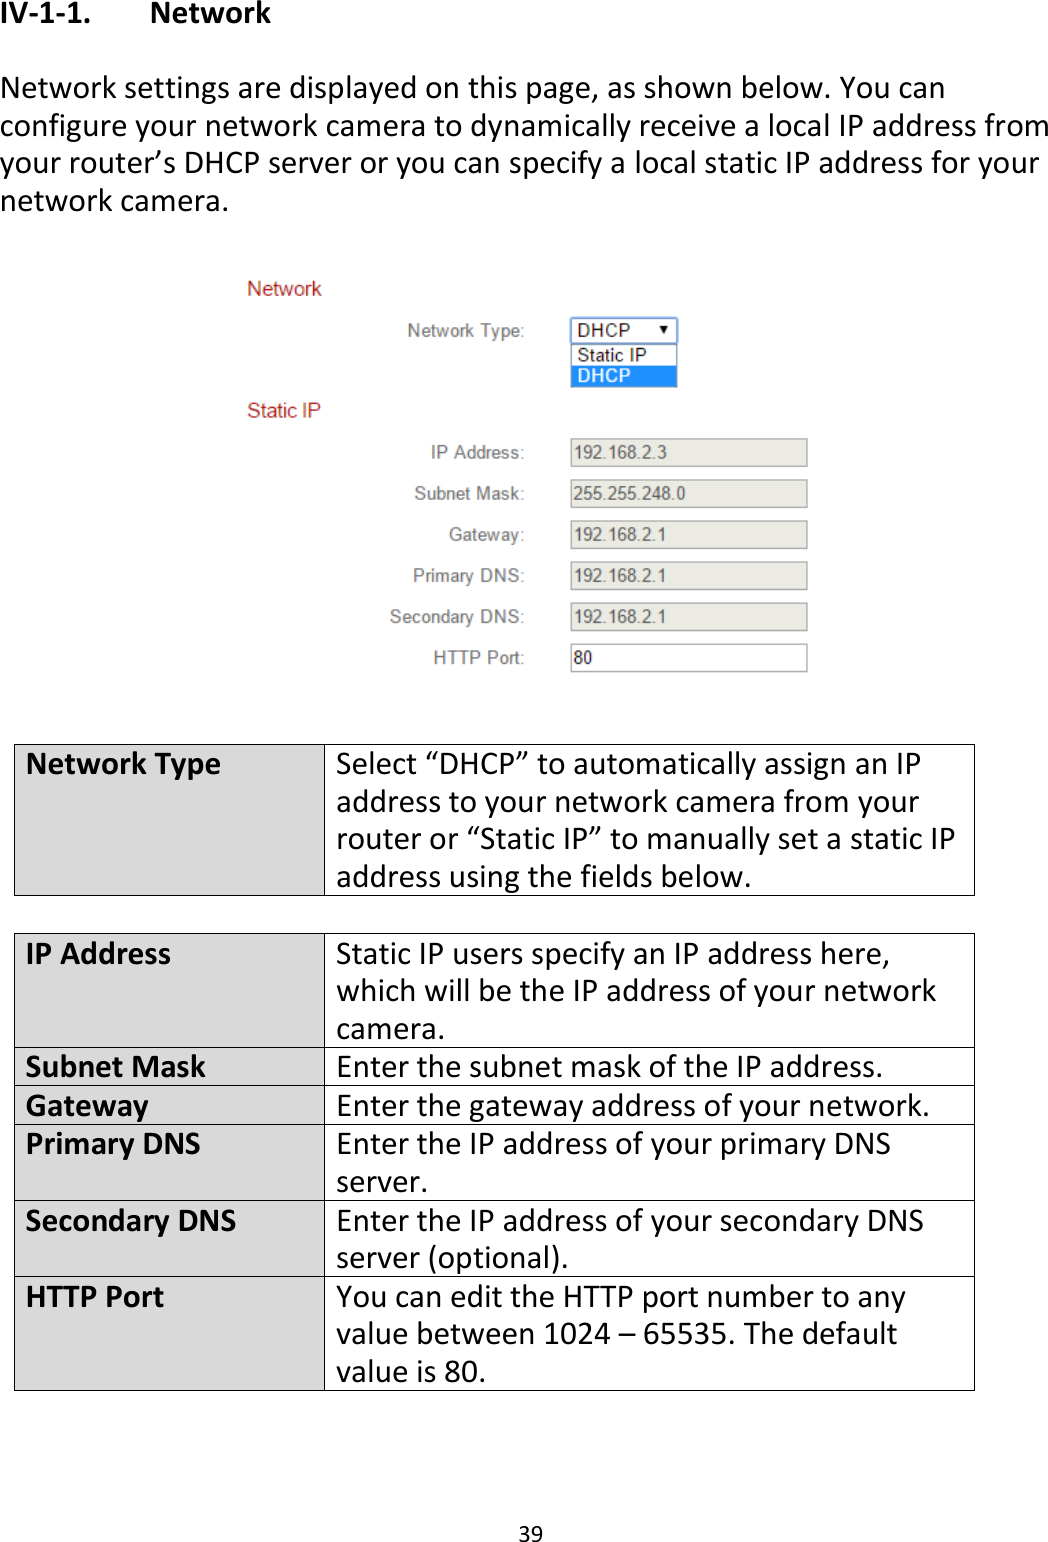 39  IV-1-1.   Network  Network settings are displayed on this page, as shown below. You can configure your network camera to dynamically receive a local IP address from your router’s DHCP server or you can specify a local static IP address for your network camera.     Network Type Select “DHCP” to automatically assign an IP address to your network camera from your router or “Static IP” to manually set a static IP address using the fields below.   IP Address Static IP users specify an IP address here, which will be the IP address of your network camera. Subnet Mask Enter the subnet mask of the IP address. Gateway Enter the gateway address of your network. Primary DNS Enter the IP address of your primary DNS server.  Secondary DNS Enter the IP address of your secondary DNS server (optional). HTTP Port You can edit the HTTP port number to any value between 1024 – 65535. The default value is 80.  